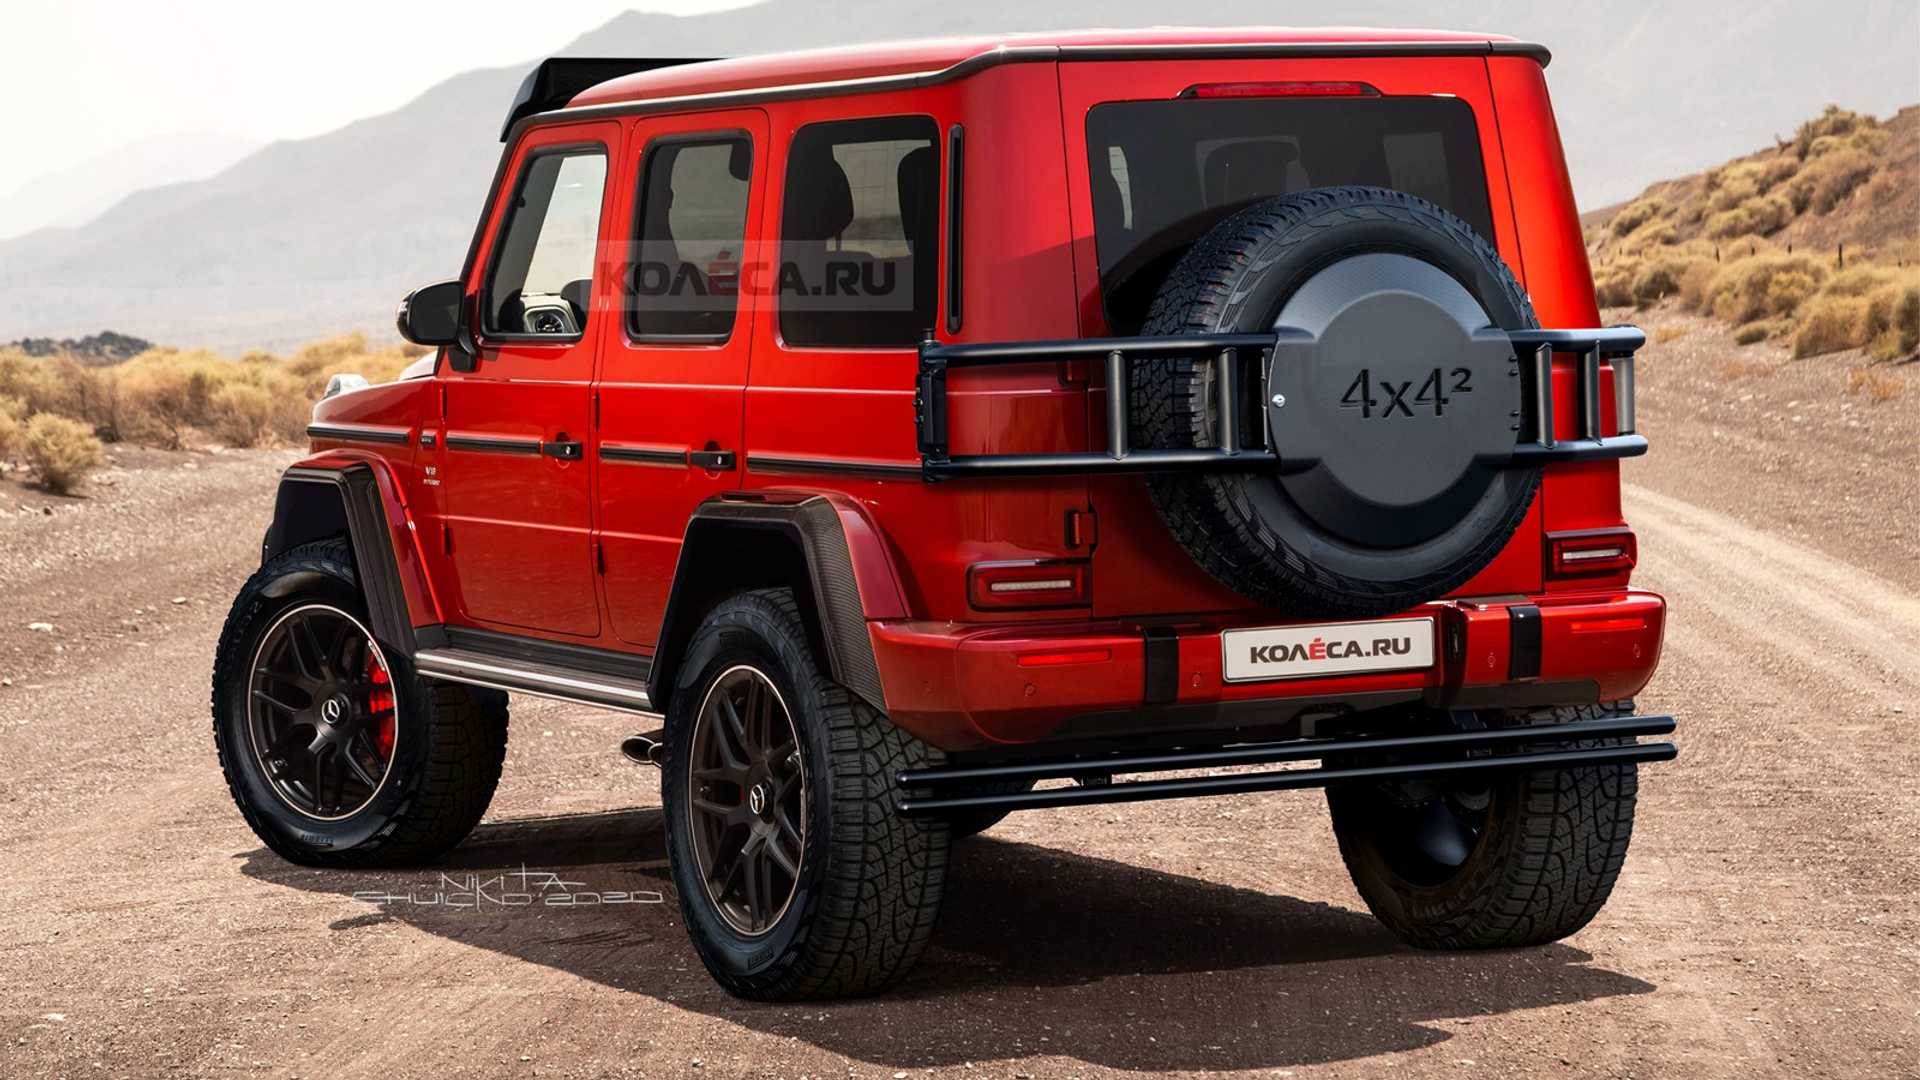 2022 MercedesBenz G 550 4x4 Squared Looks Real in Accurate Rendering